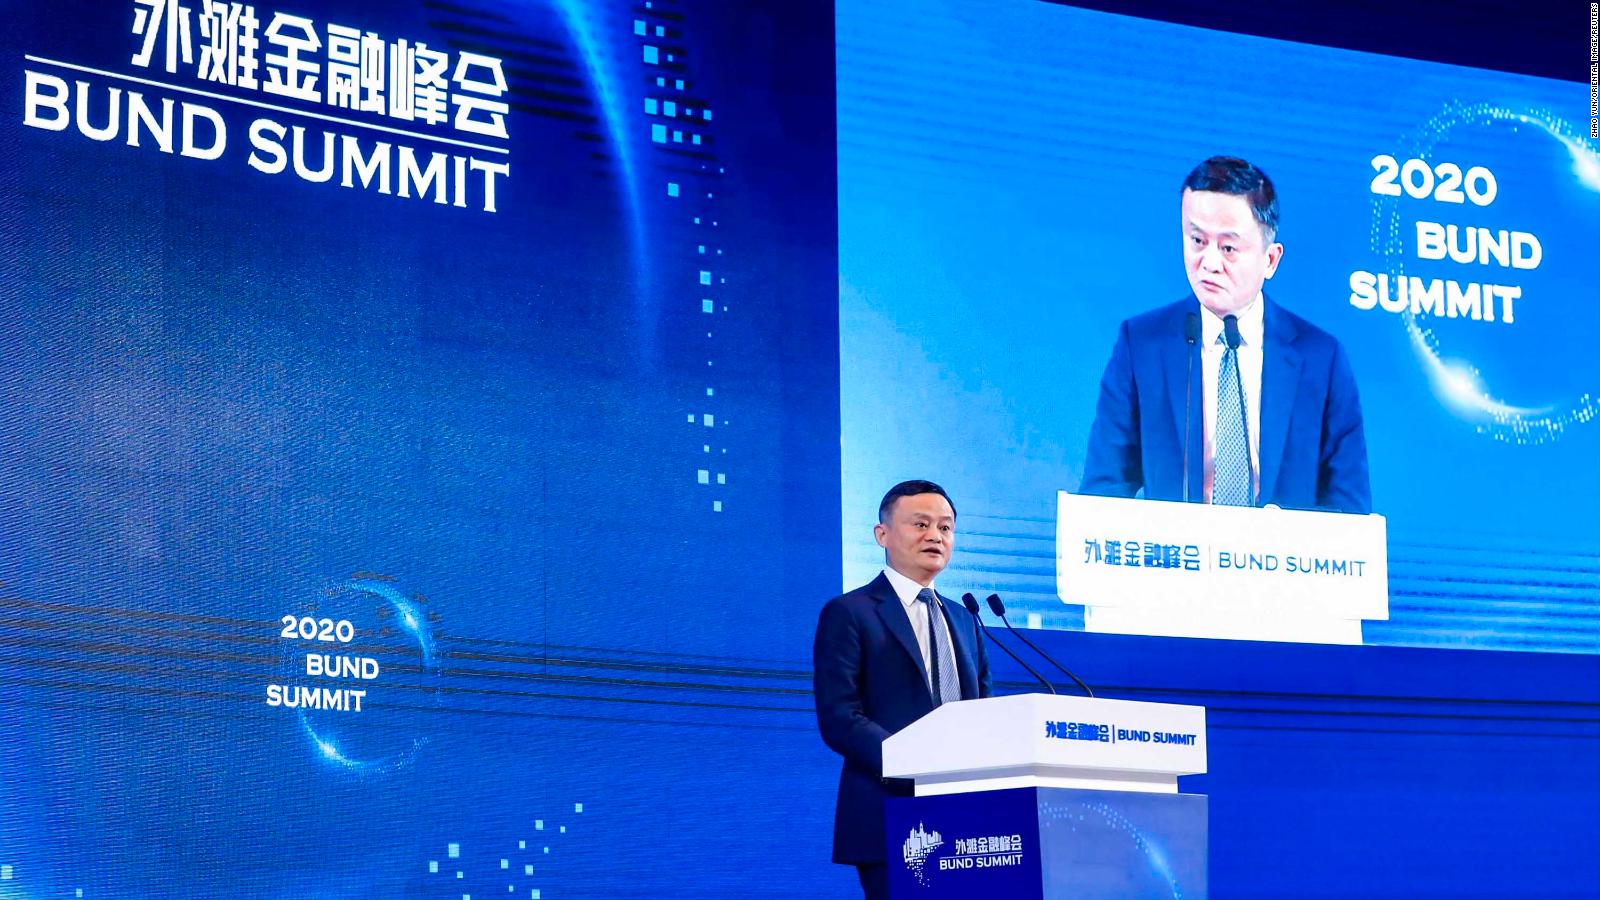 What is Jack Ma’s silent message?